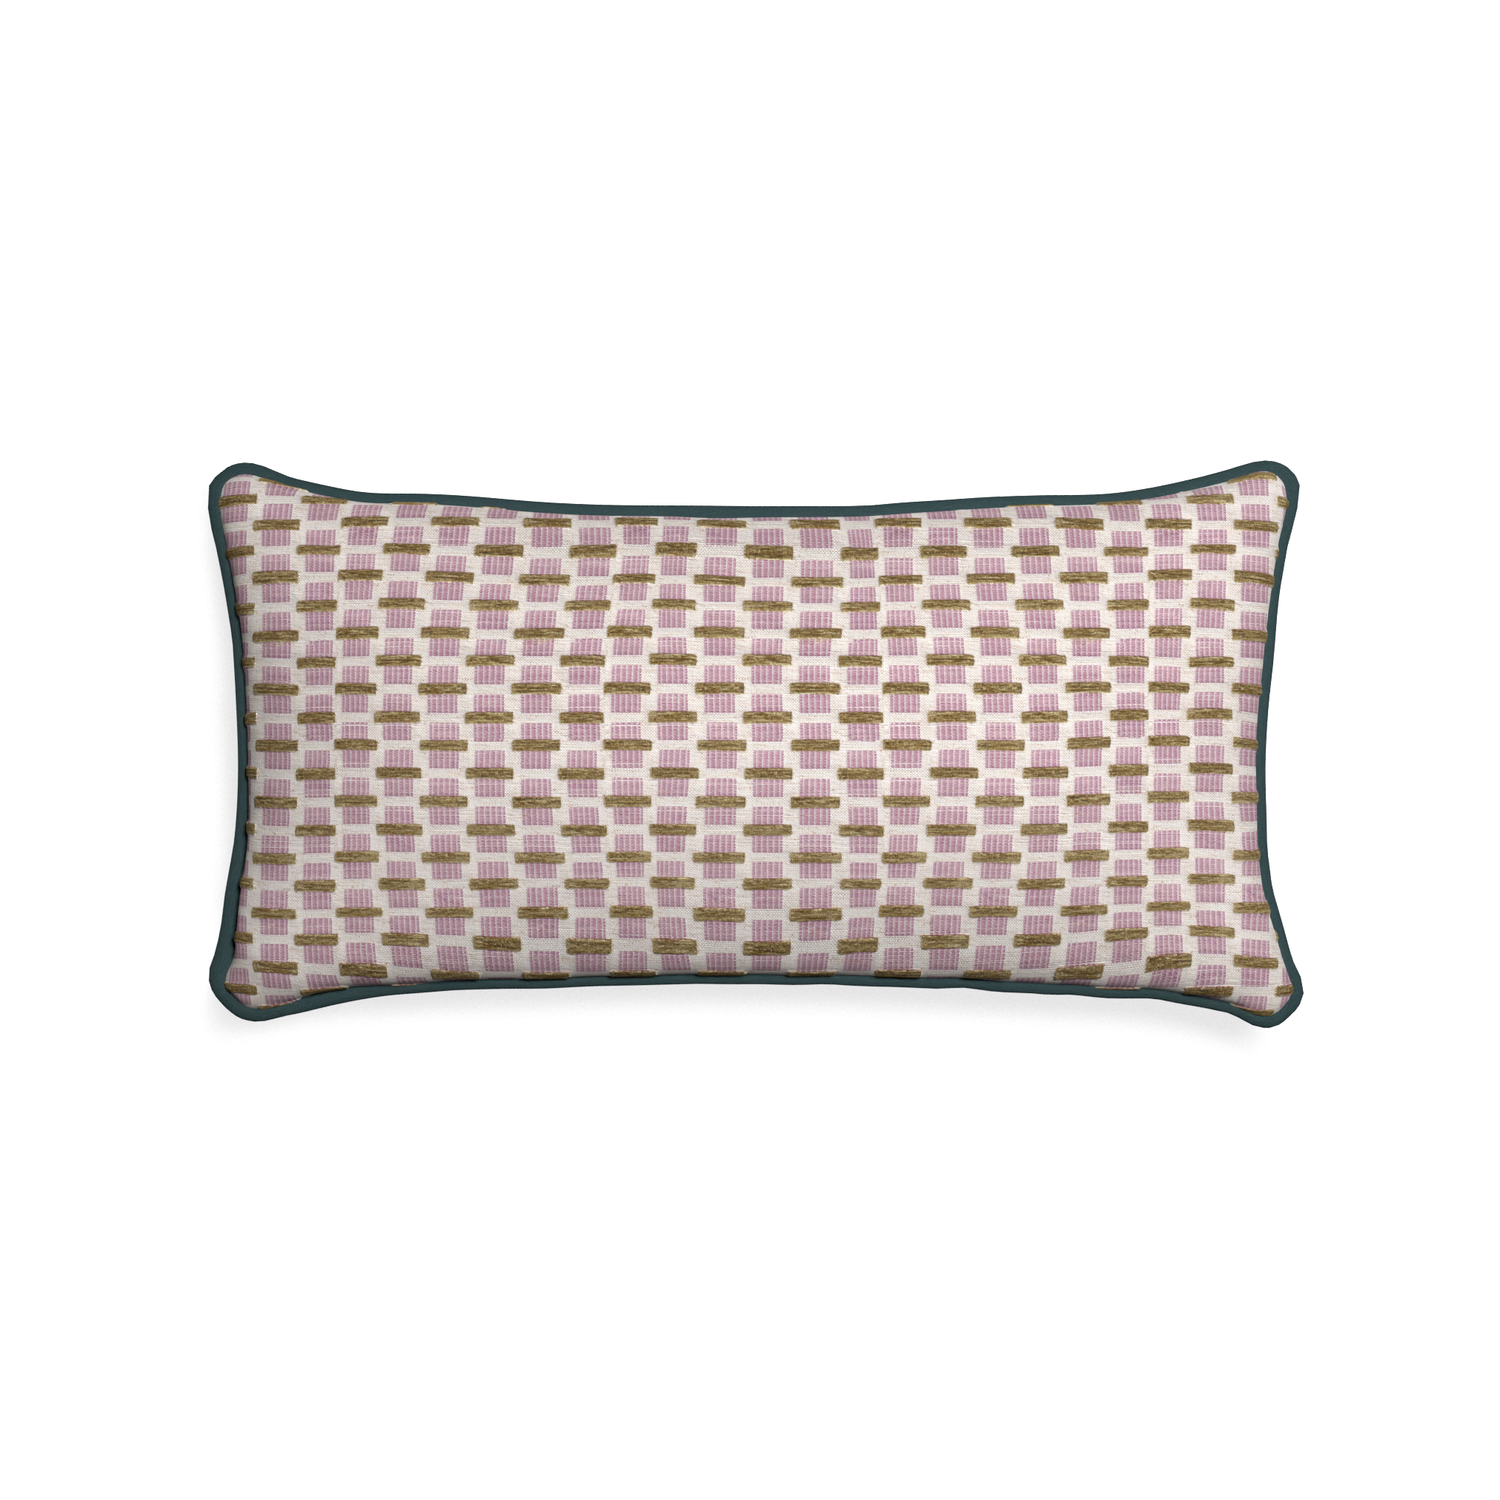 Midi-lumbar willow orchid custom pink geometric chenillepillow with p piping on white background